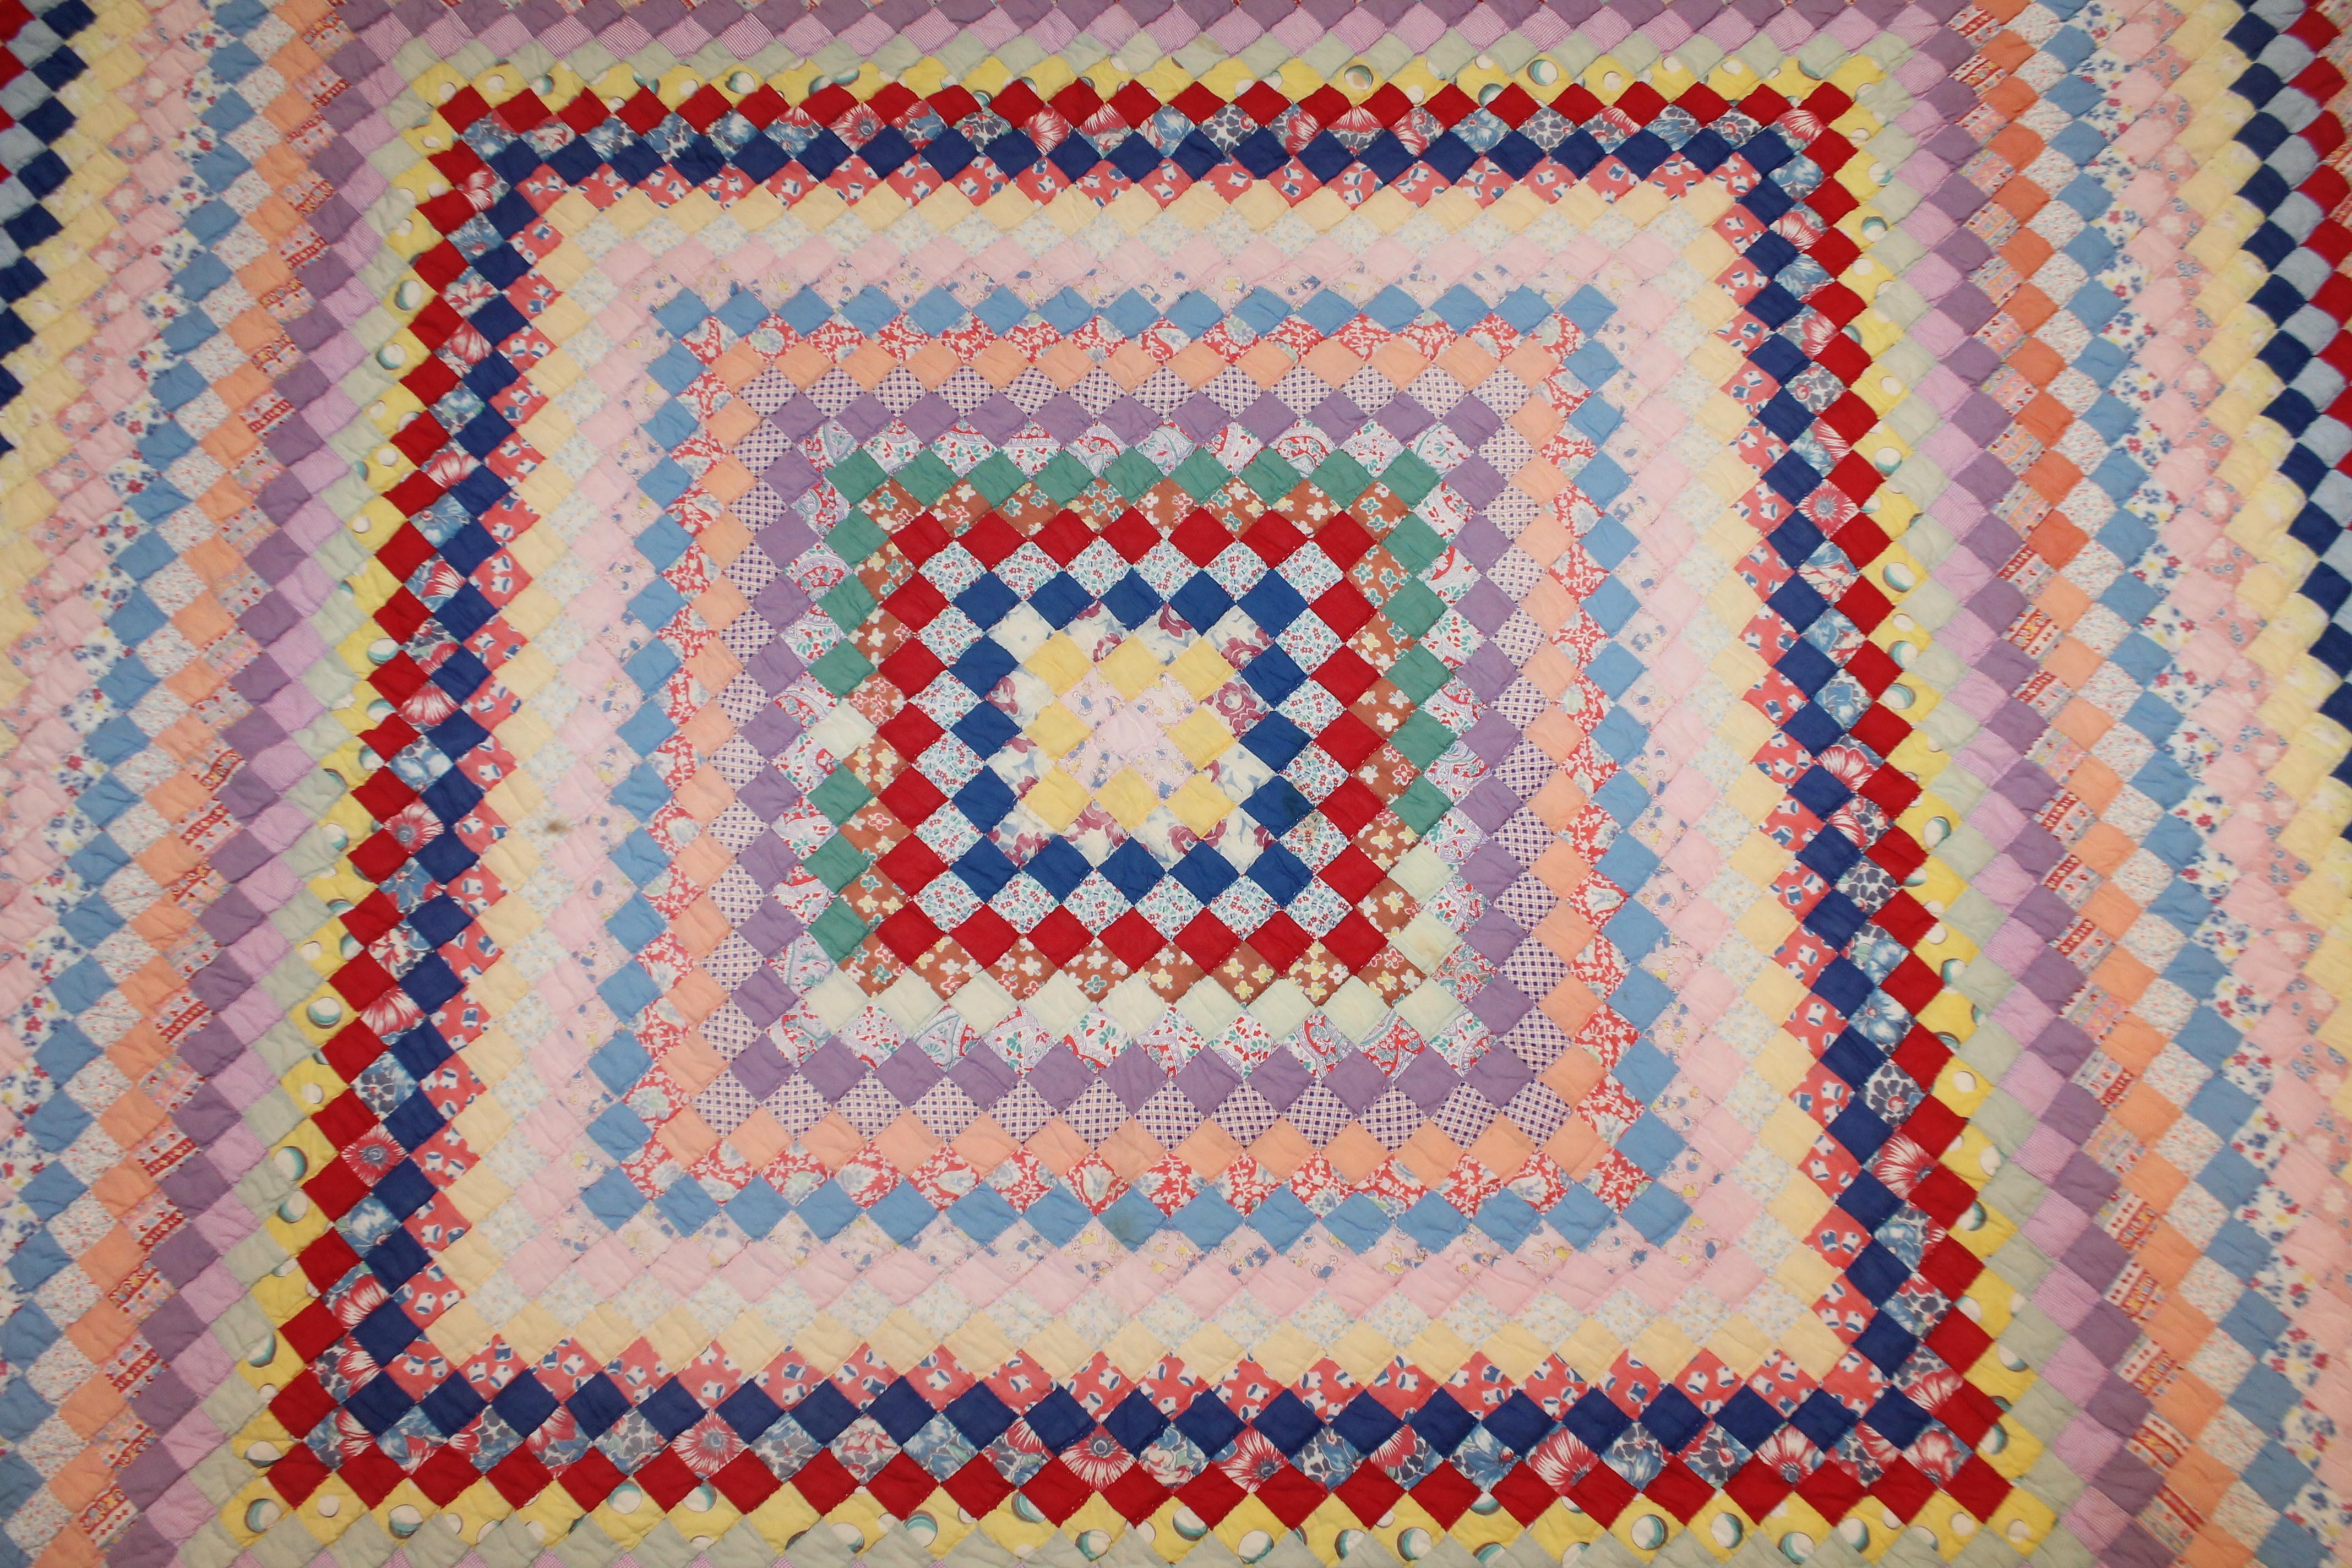 This finely pieced postage stamp trip around the world pattern quilt is in good condition and resembles Easter or spring colors. The condition is good and great for a girls room.